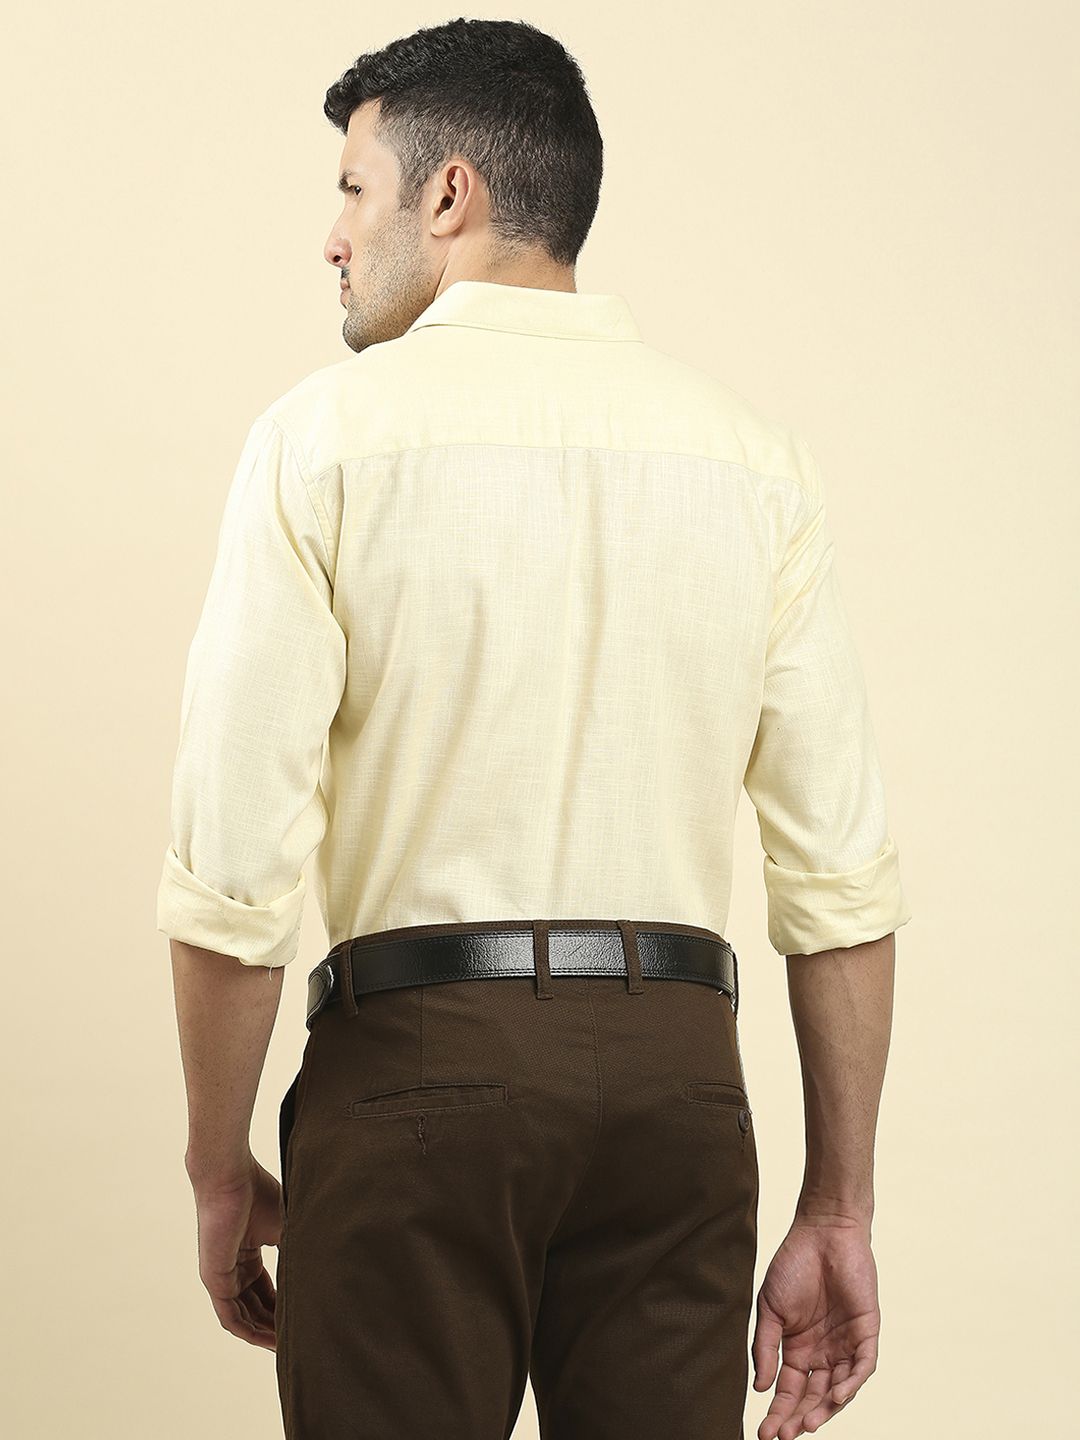 a young man wearing a gray shirt and khaki pants Stock Photo by Icons8